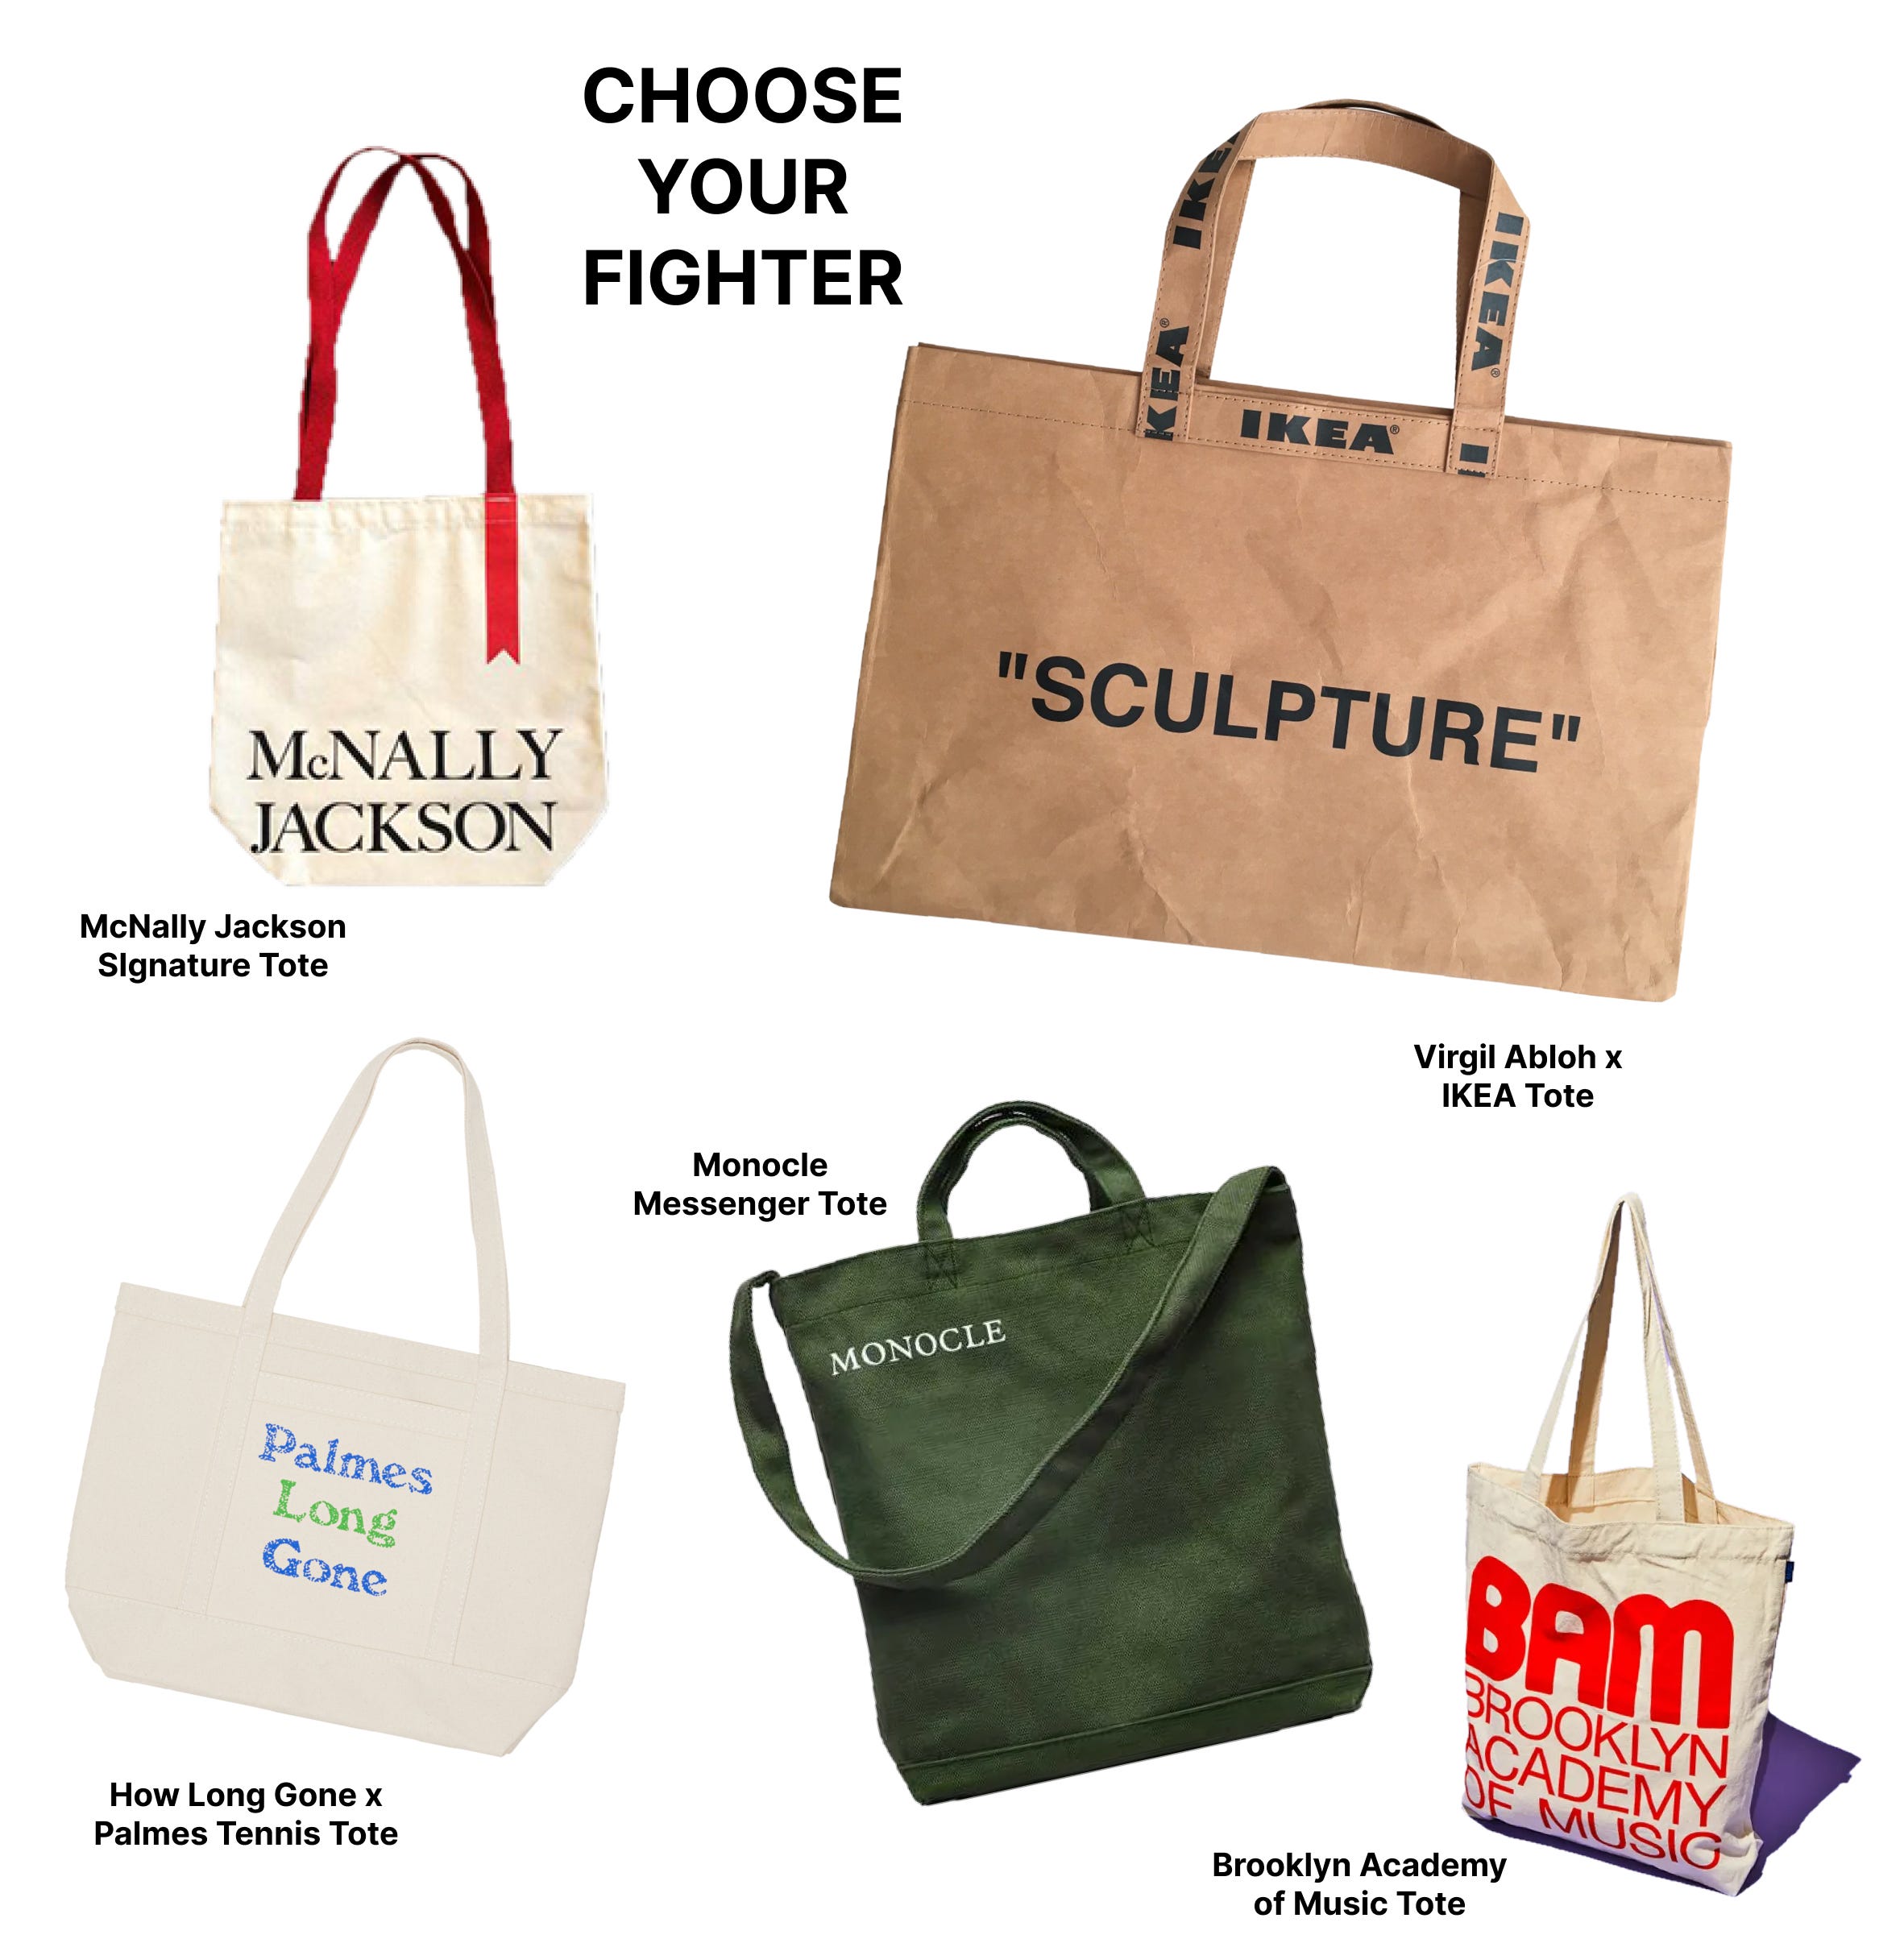 YOUR NEW FAVORITE TOTE BAG IS HERE